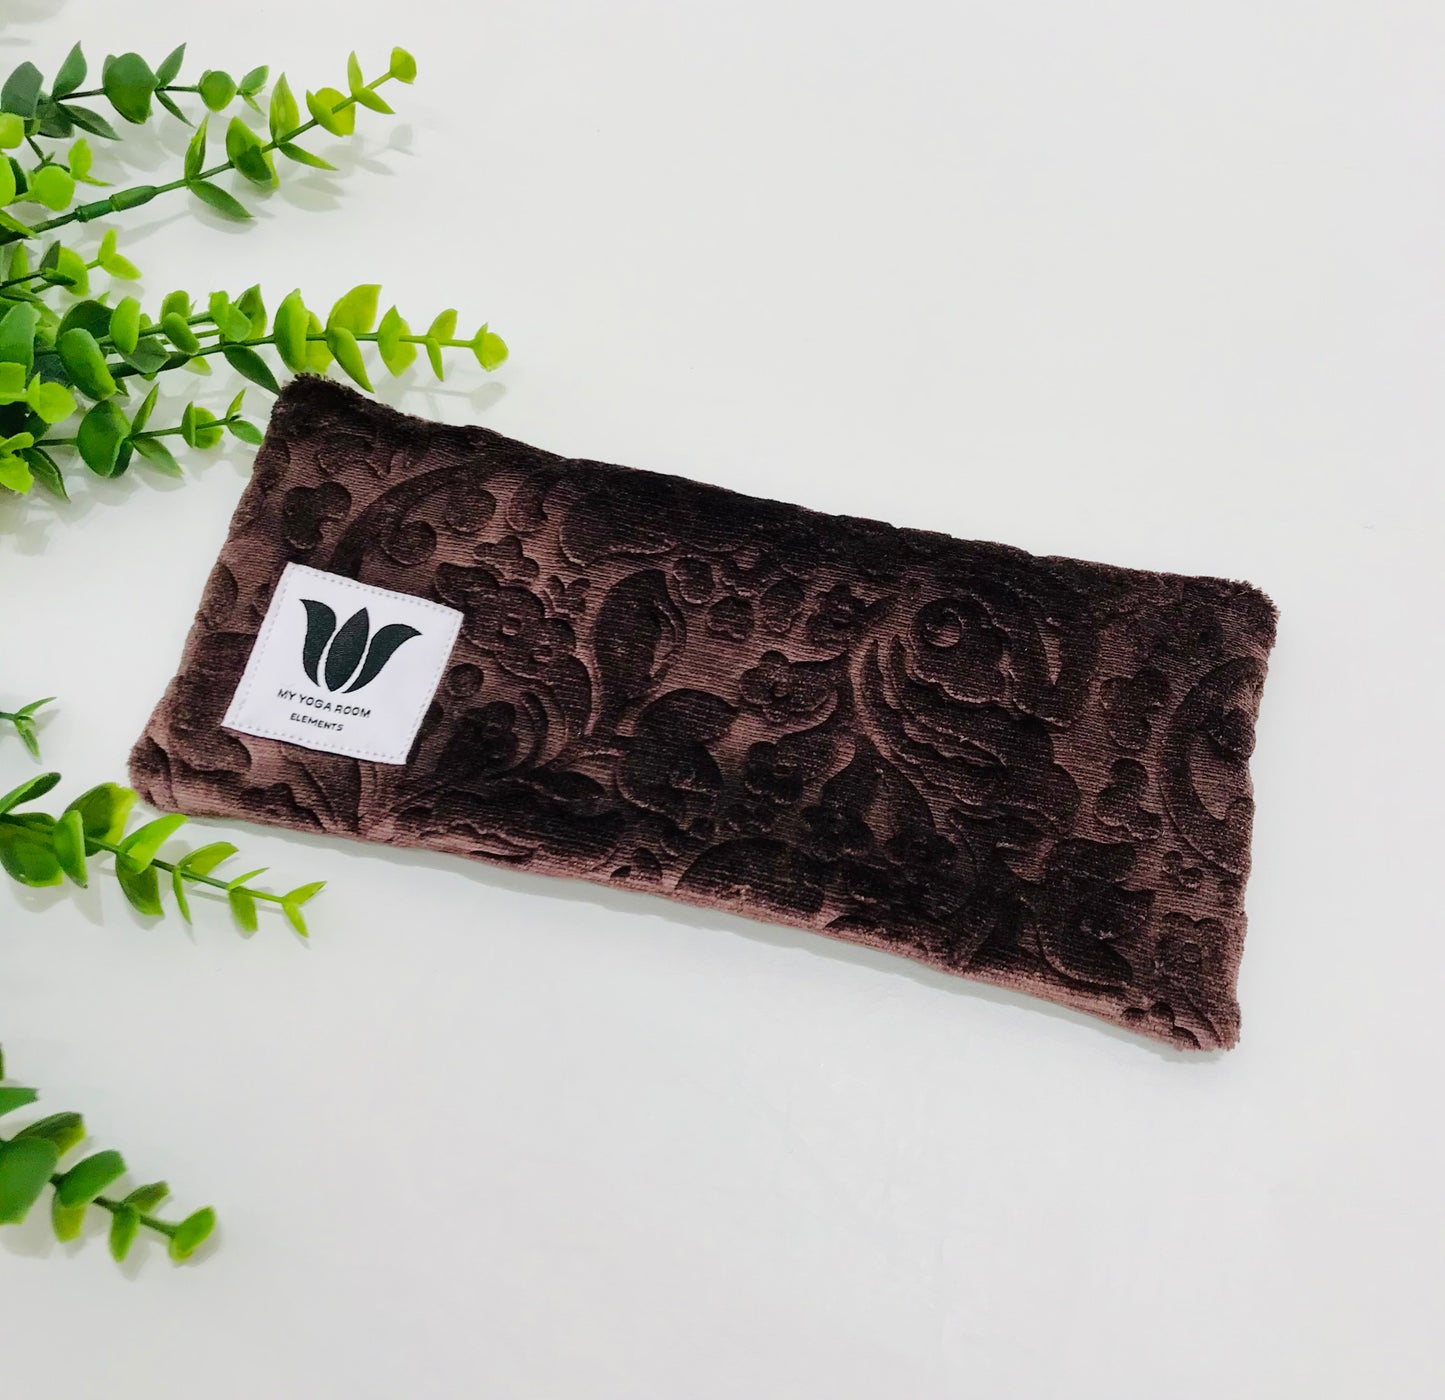 Yoga eye pillow, unscented, therapeutically weighted to soothe eye strain and stress or enhance your savasana. Handcrafted in Canada by My Yoga Room Elements. Purple plush embossed and bamboo fabric.